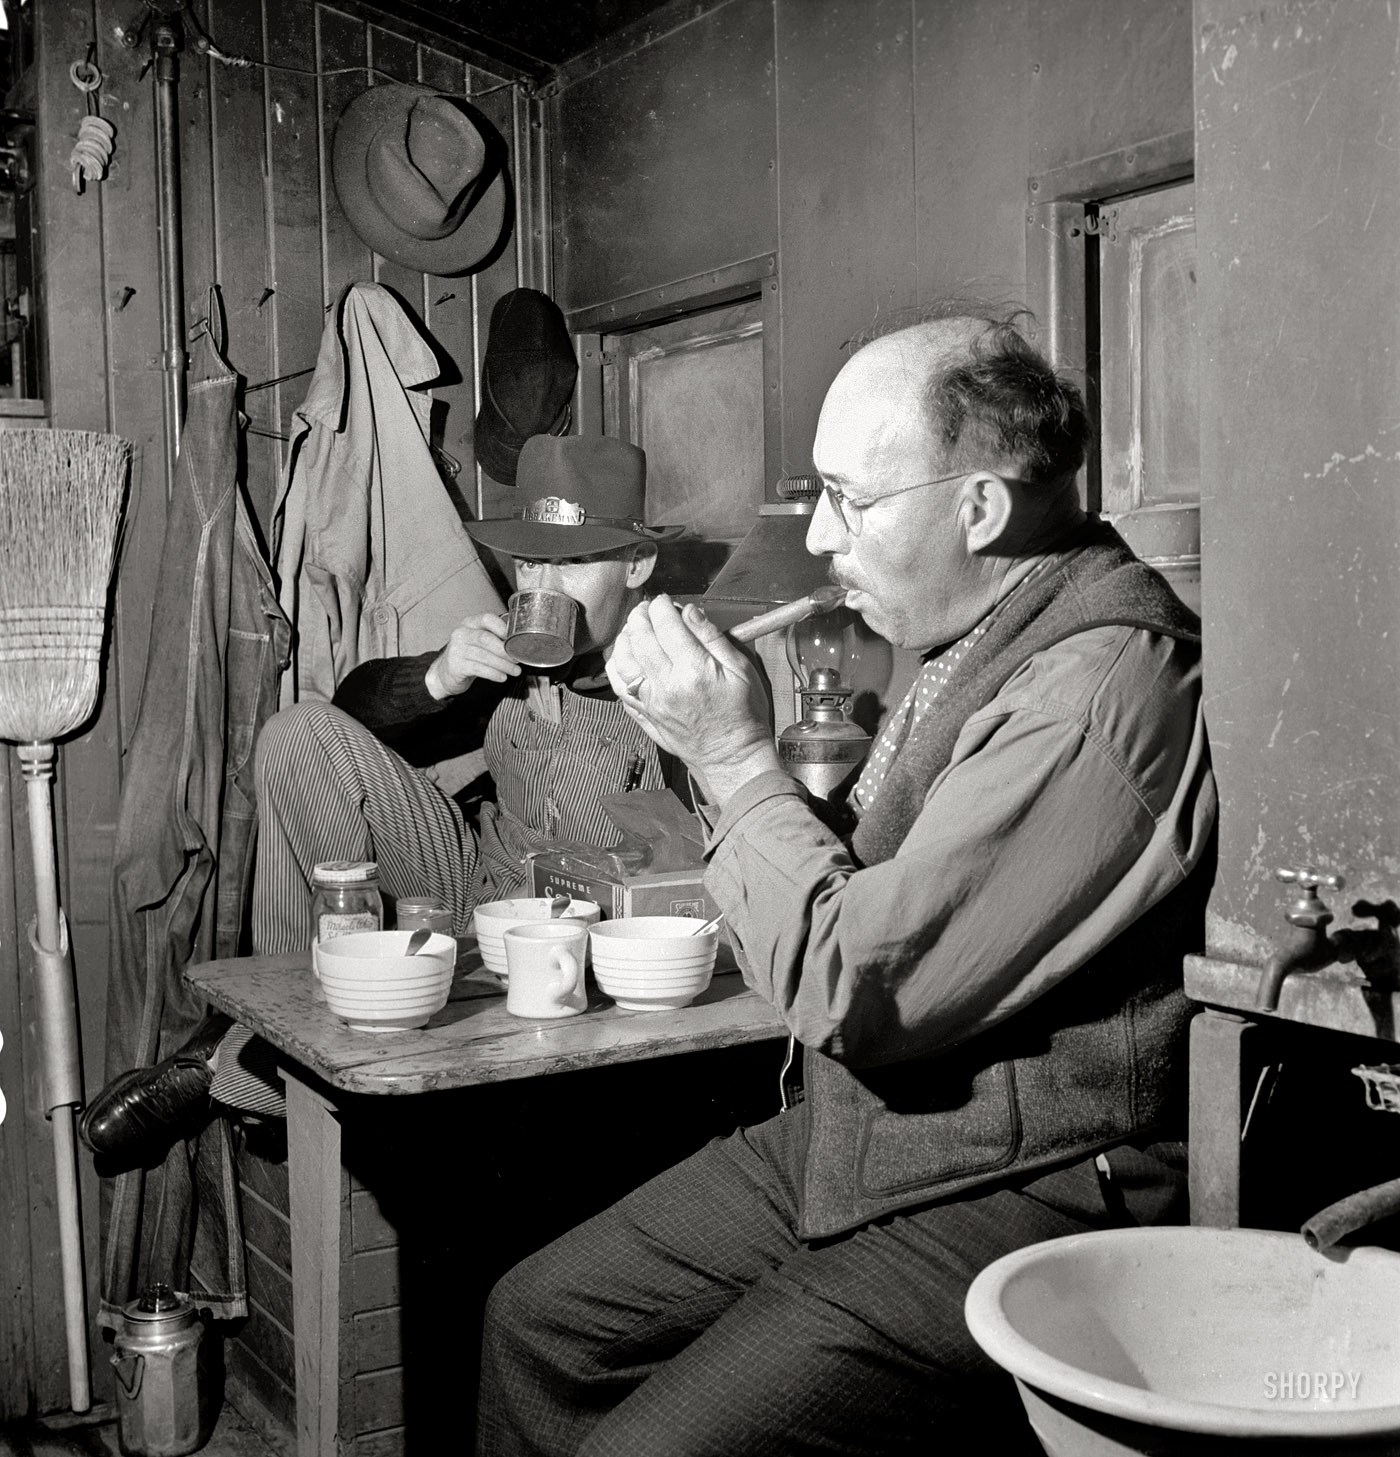 March 1943. "Conductor James M. Johnson and brakeman Jack Torbet having lunch in the caboose on the Atchison, Topeka and Santa Fe Railroad between Waynoka, Oklahoma, and Canadian, Texas." Medium-format nitrate negative by Jack Delano for the Office of War Information. View full size.